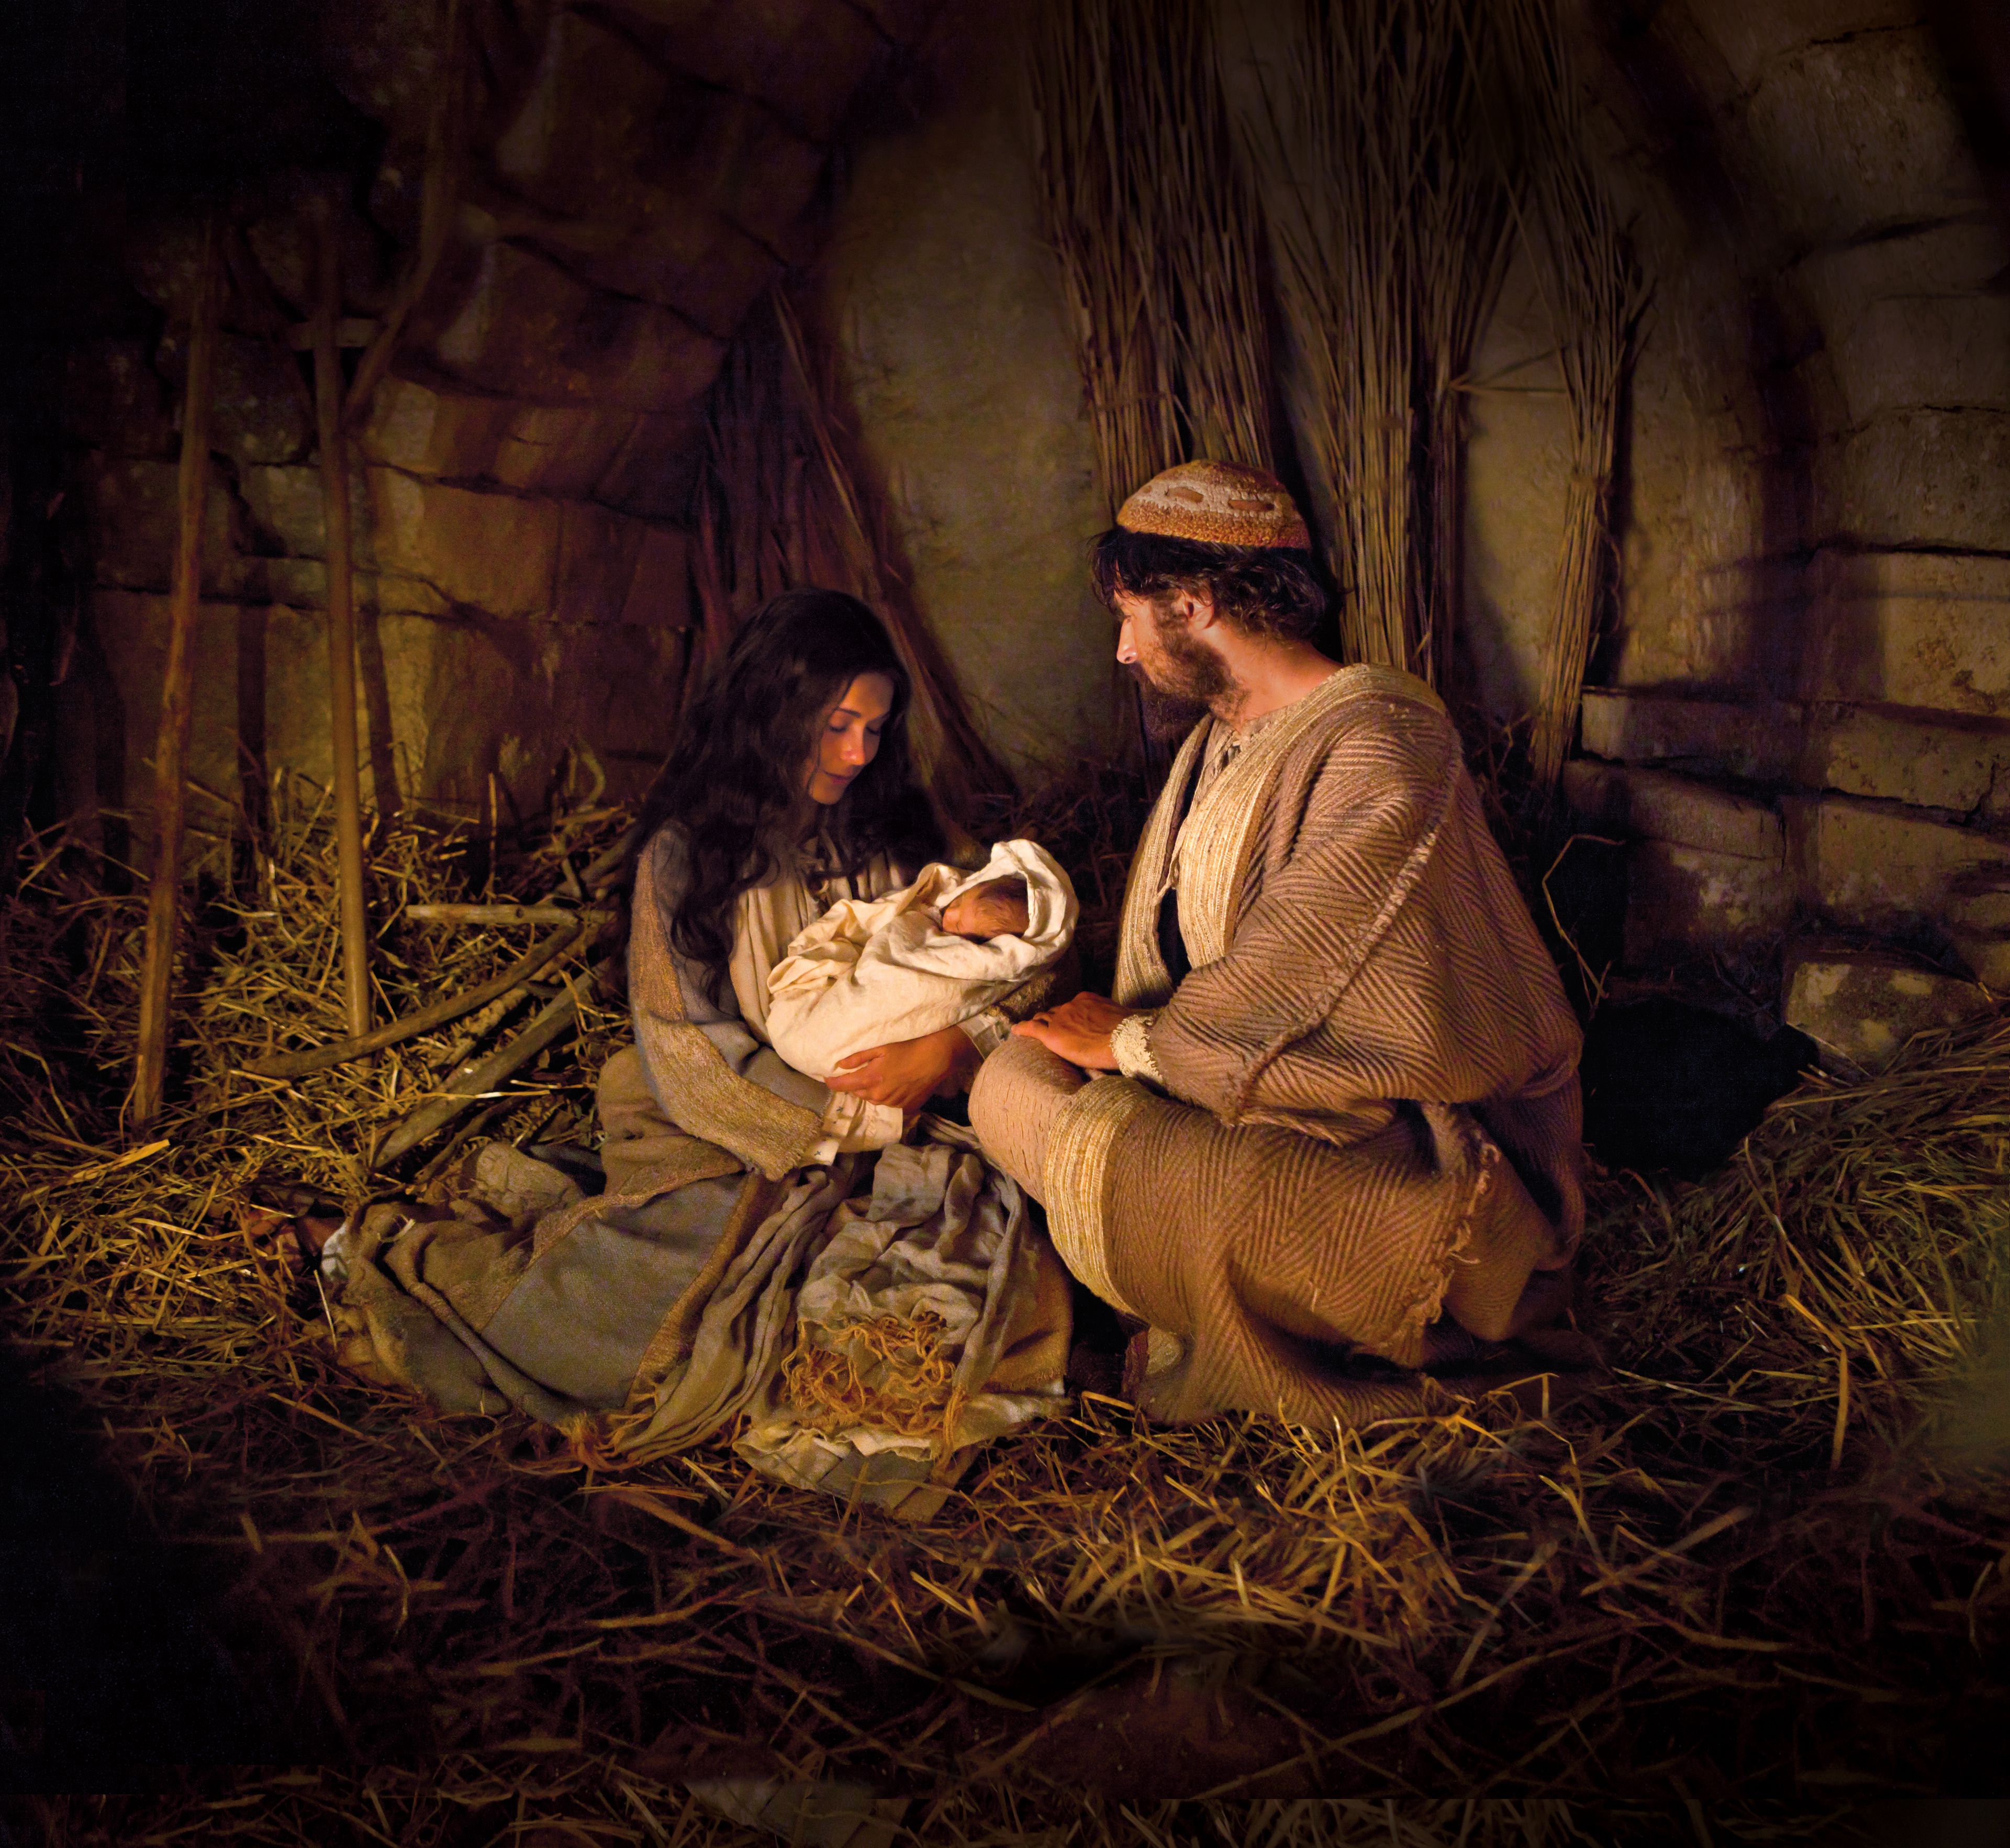 Joseph and Mary hold the baby Jesus on the night of His birth.